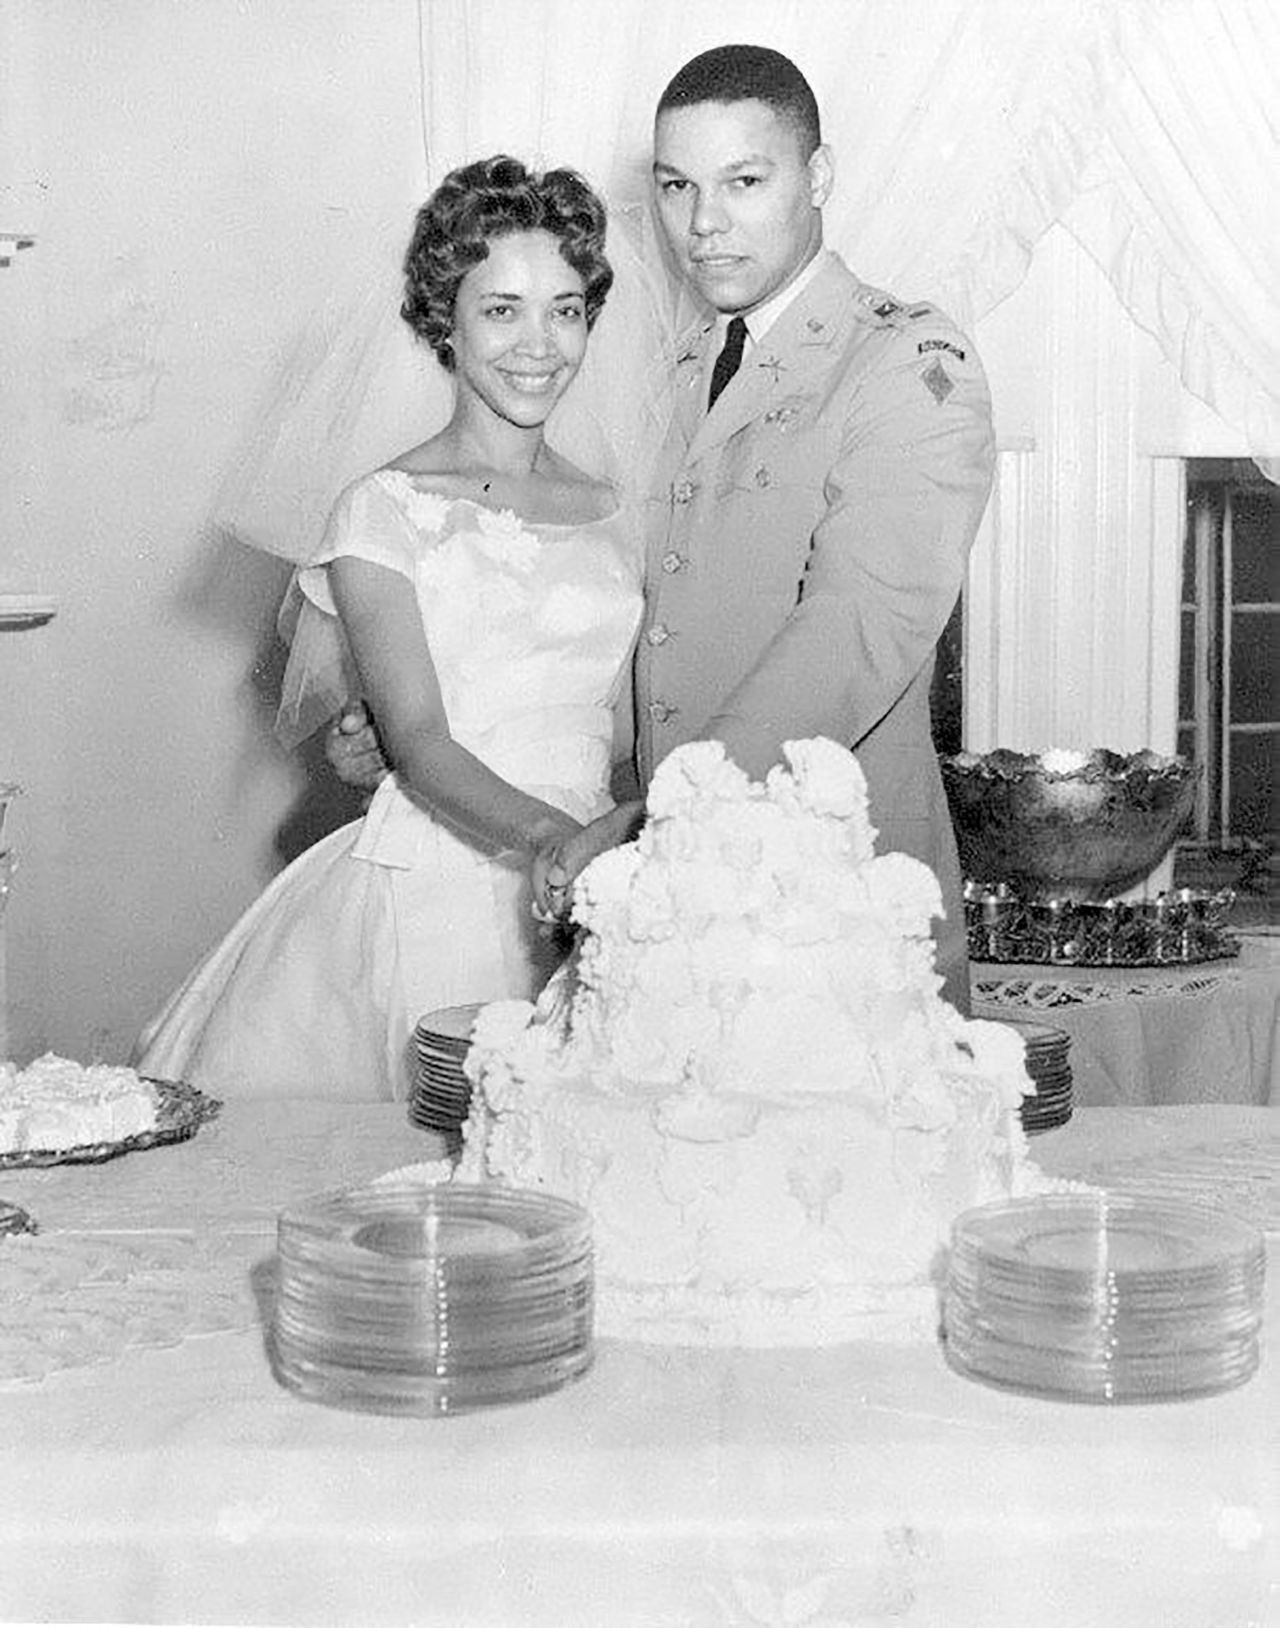 Powell married his wife, Alma, in 1962, He joined the US Army in 1958 and served two tours of duty in South Vietnam.